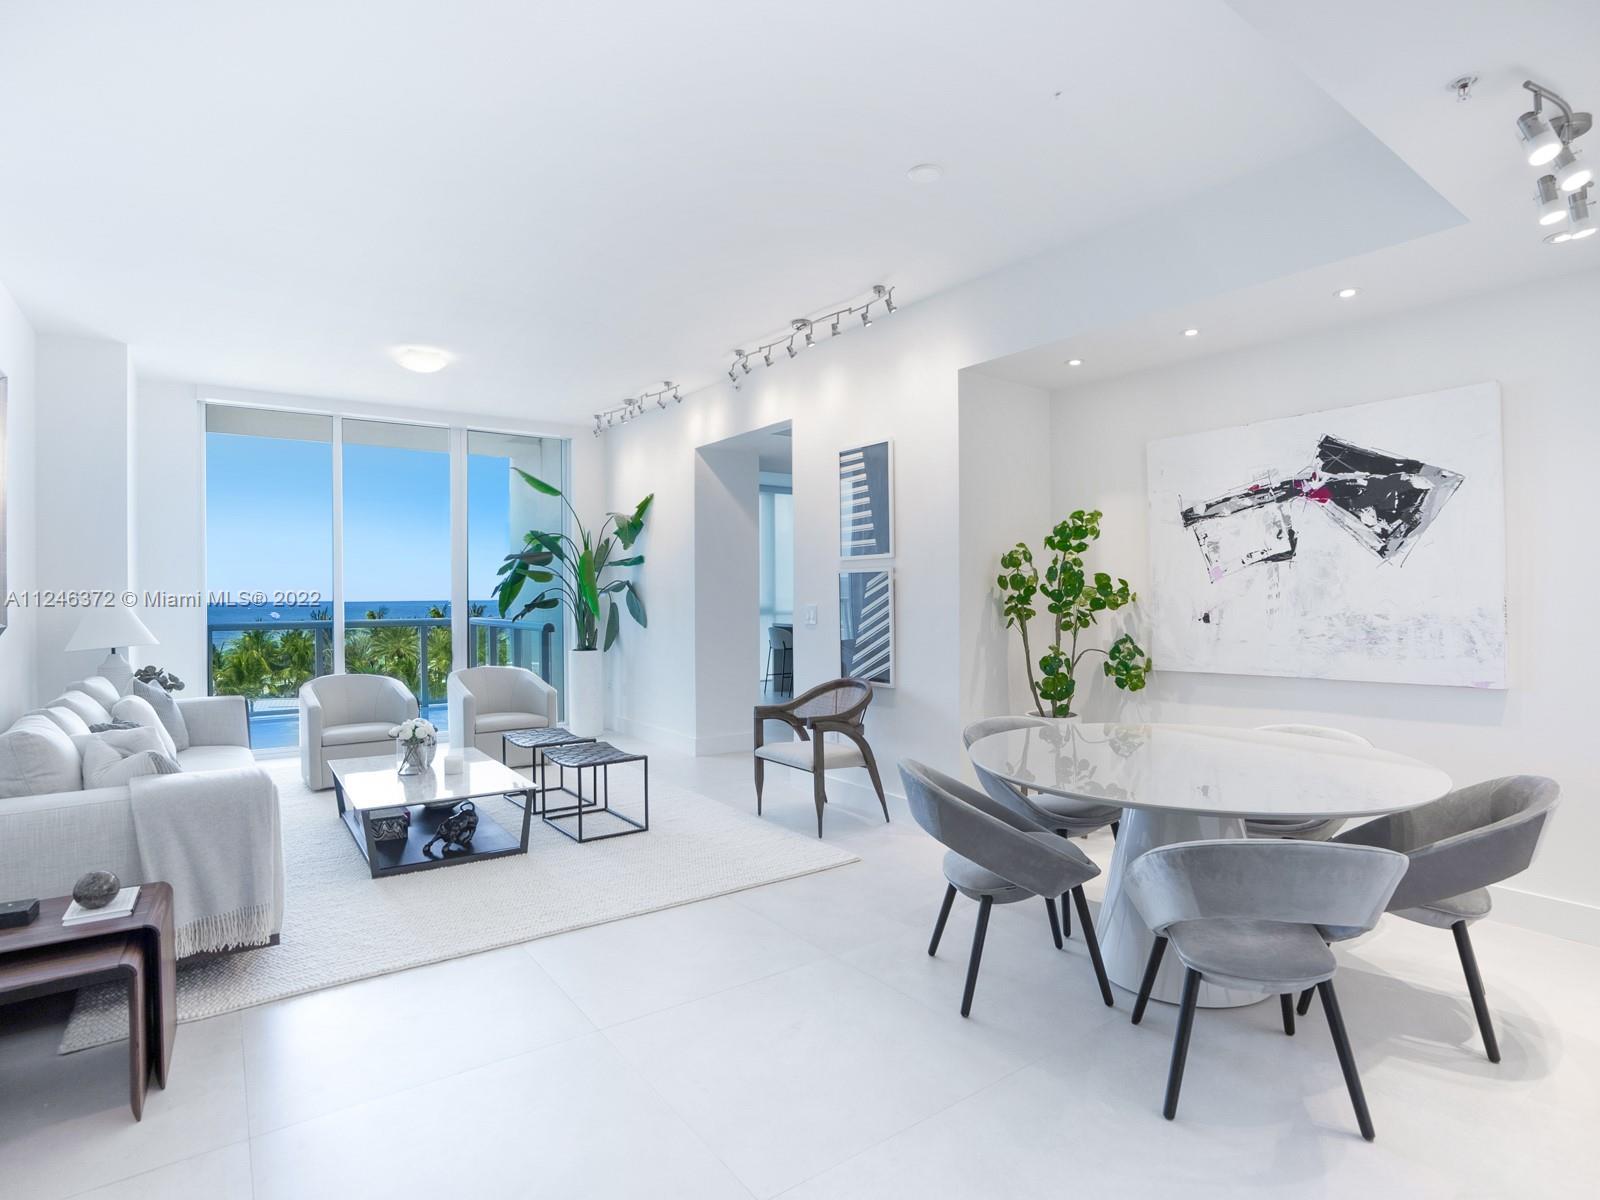 Step Inside With Me! This direct oceanfront modern residence represents a rare 2 Bedroom + Den, 3 fu